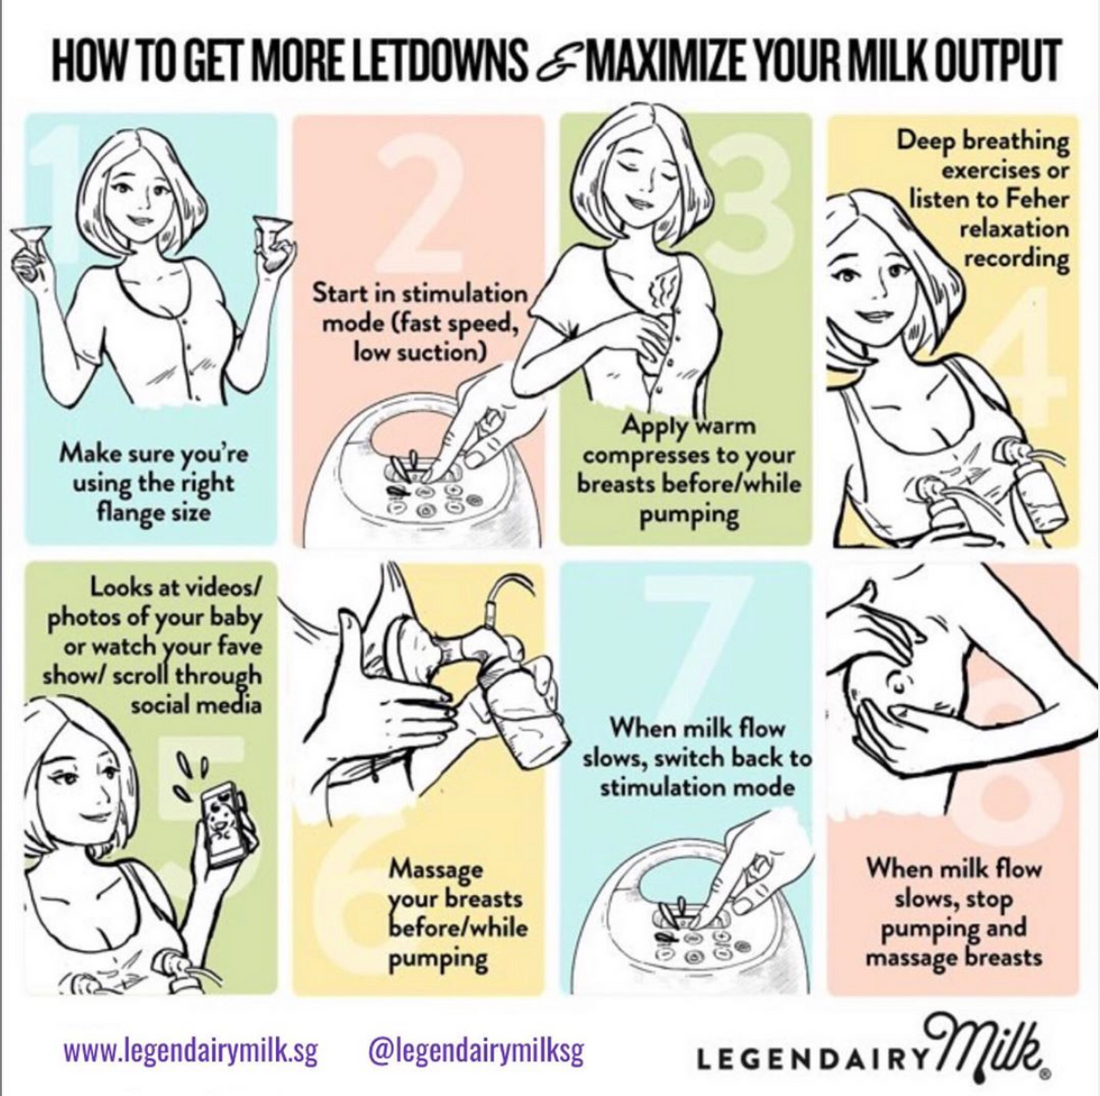 Pump More Breast Milk: 10 Powerful Pumping Tips to Increase Your Output -  Mommy's Bundle